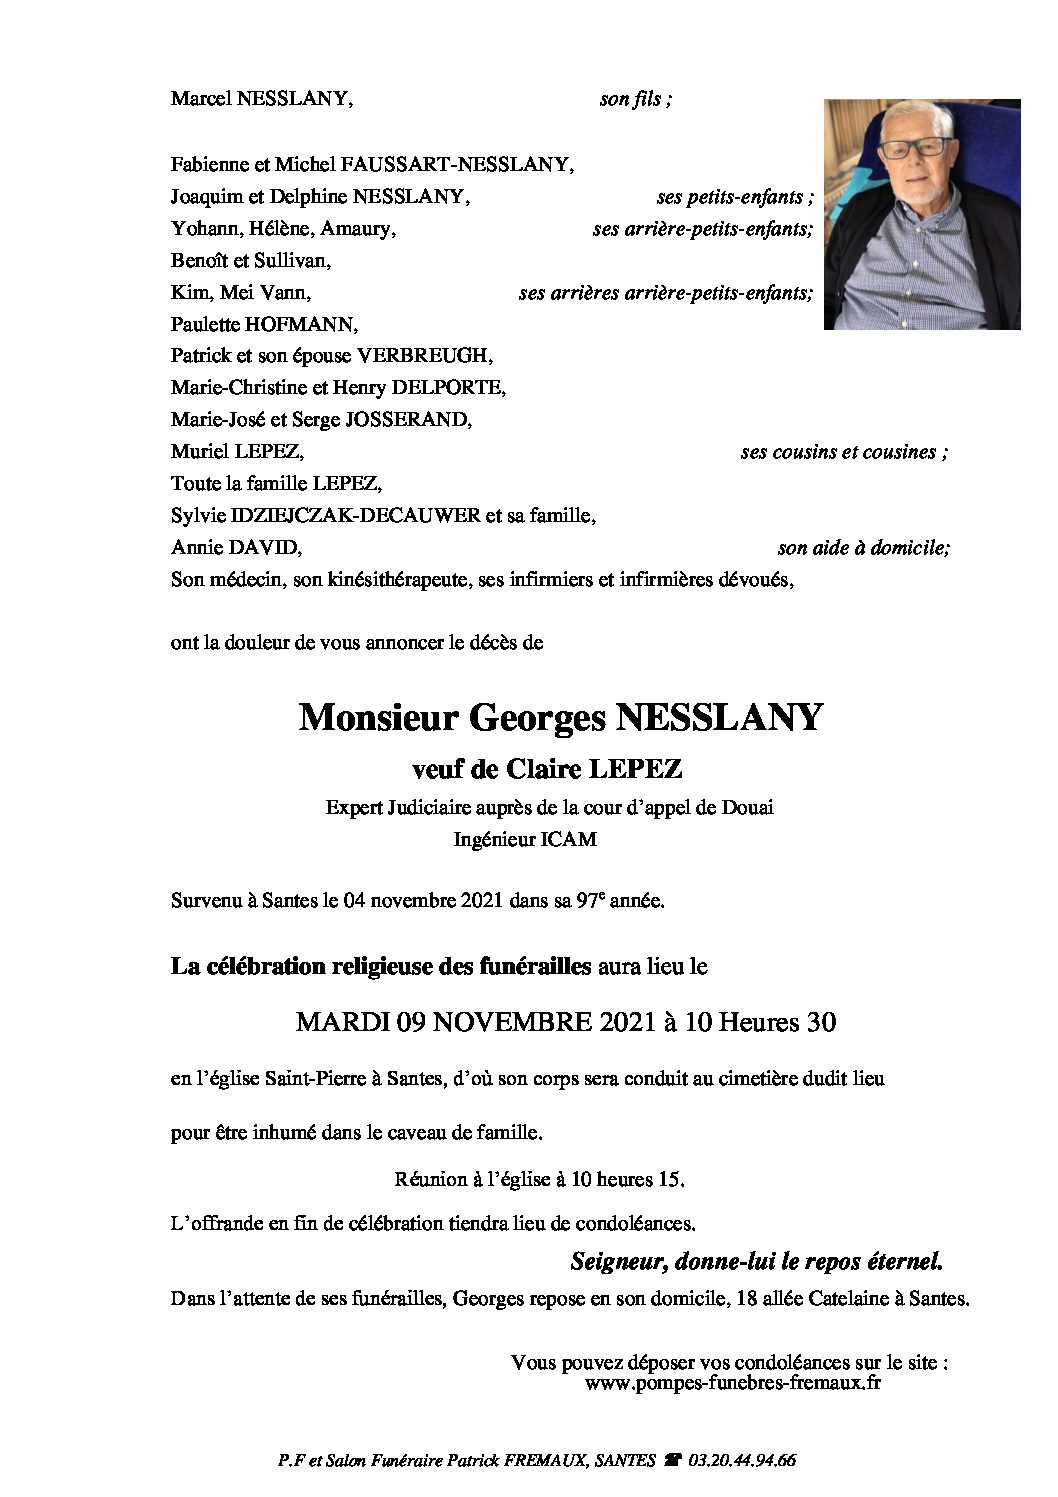 Monsieur Georges NESSLANY